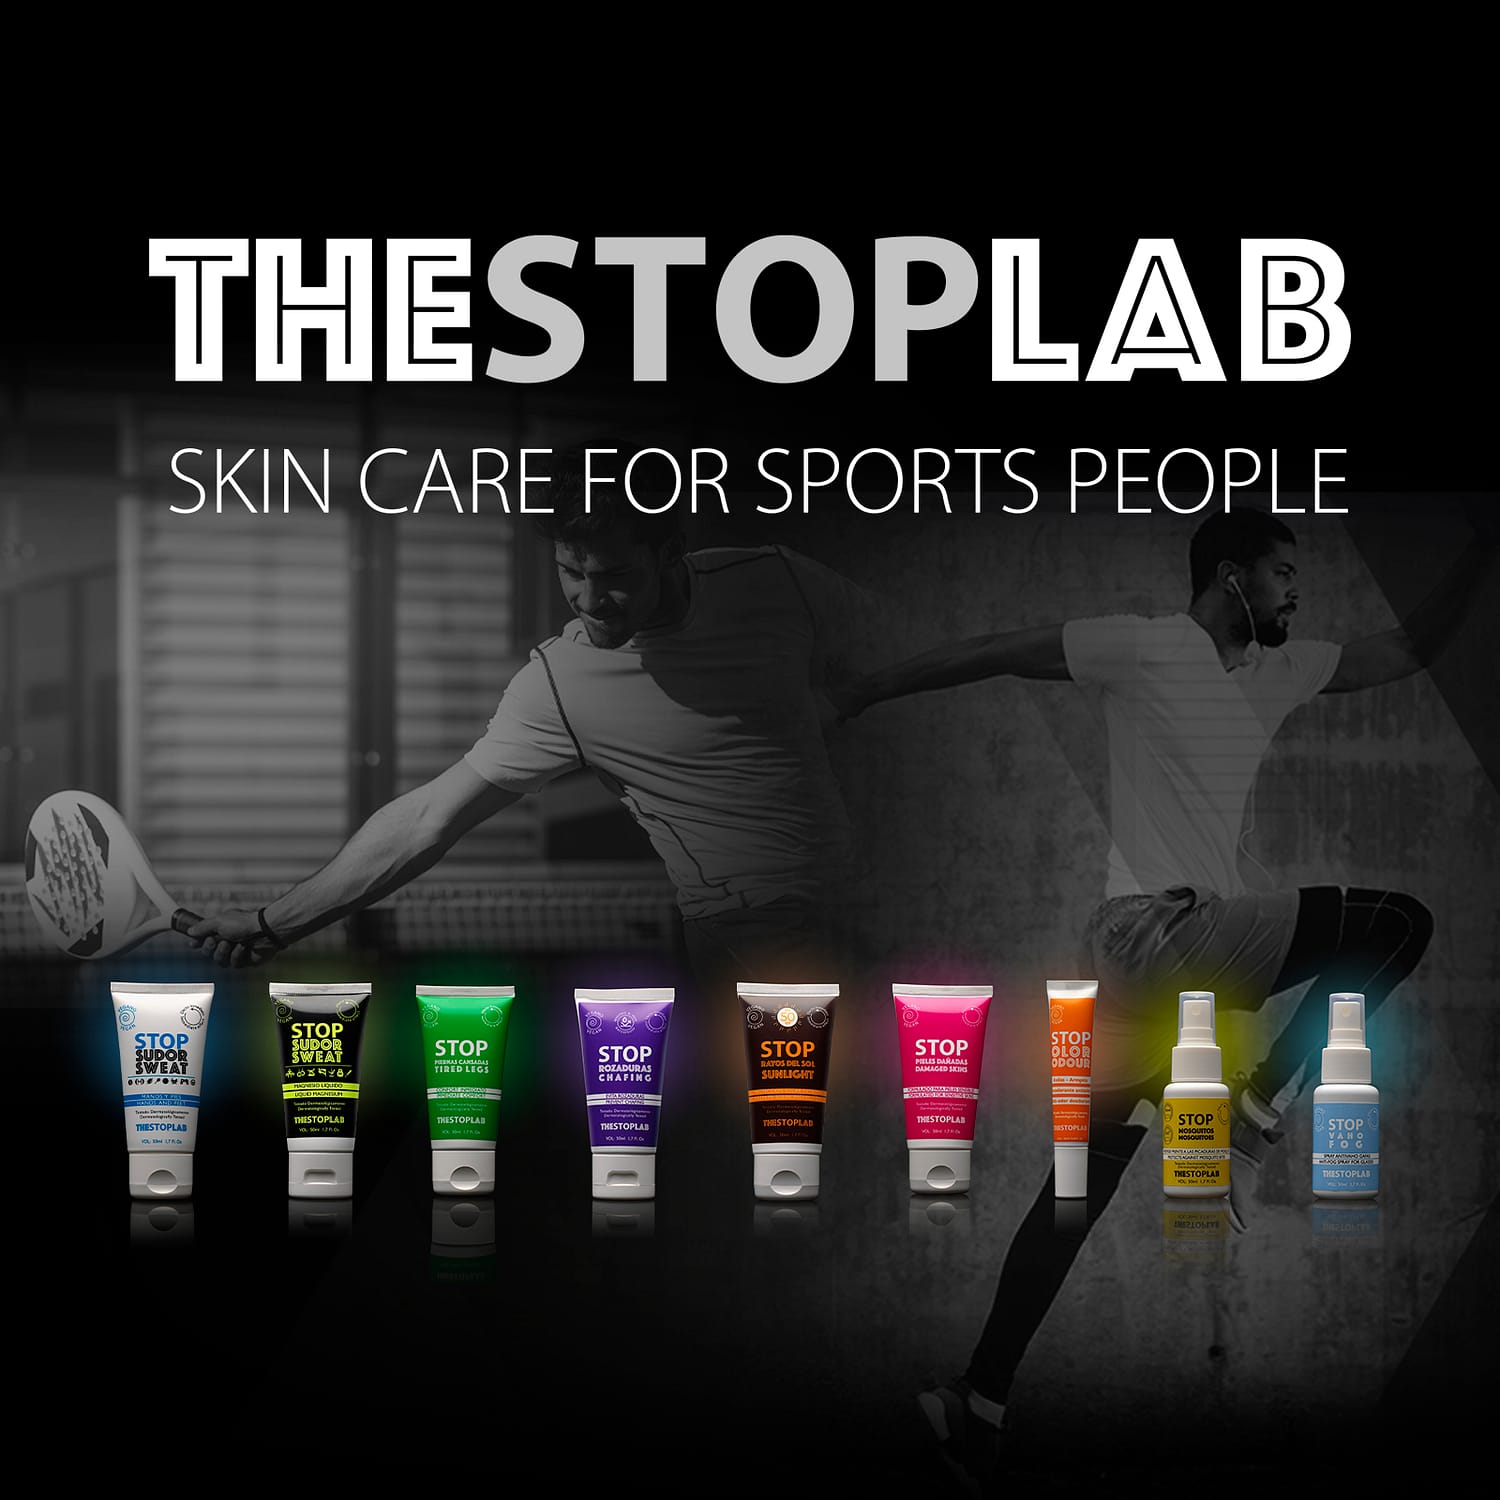 THESTOPLAB SKIN CARE FOR SPORTS PEOPLE